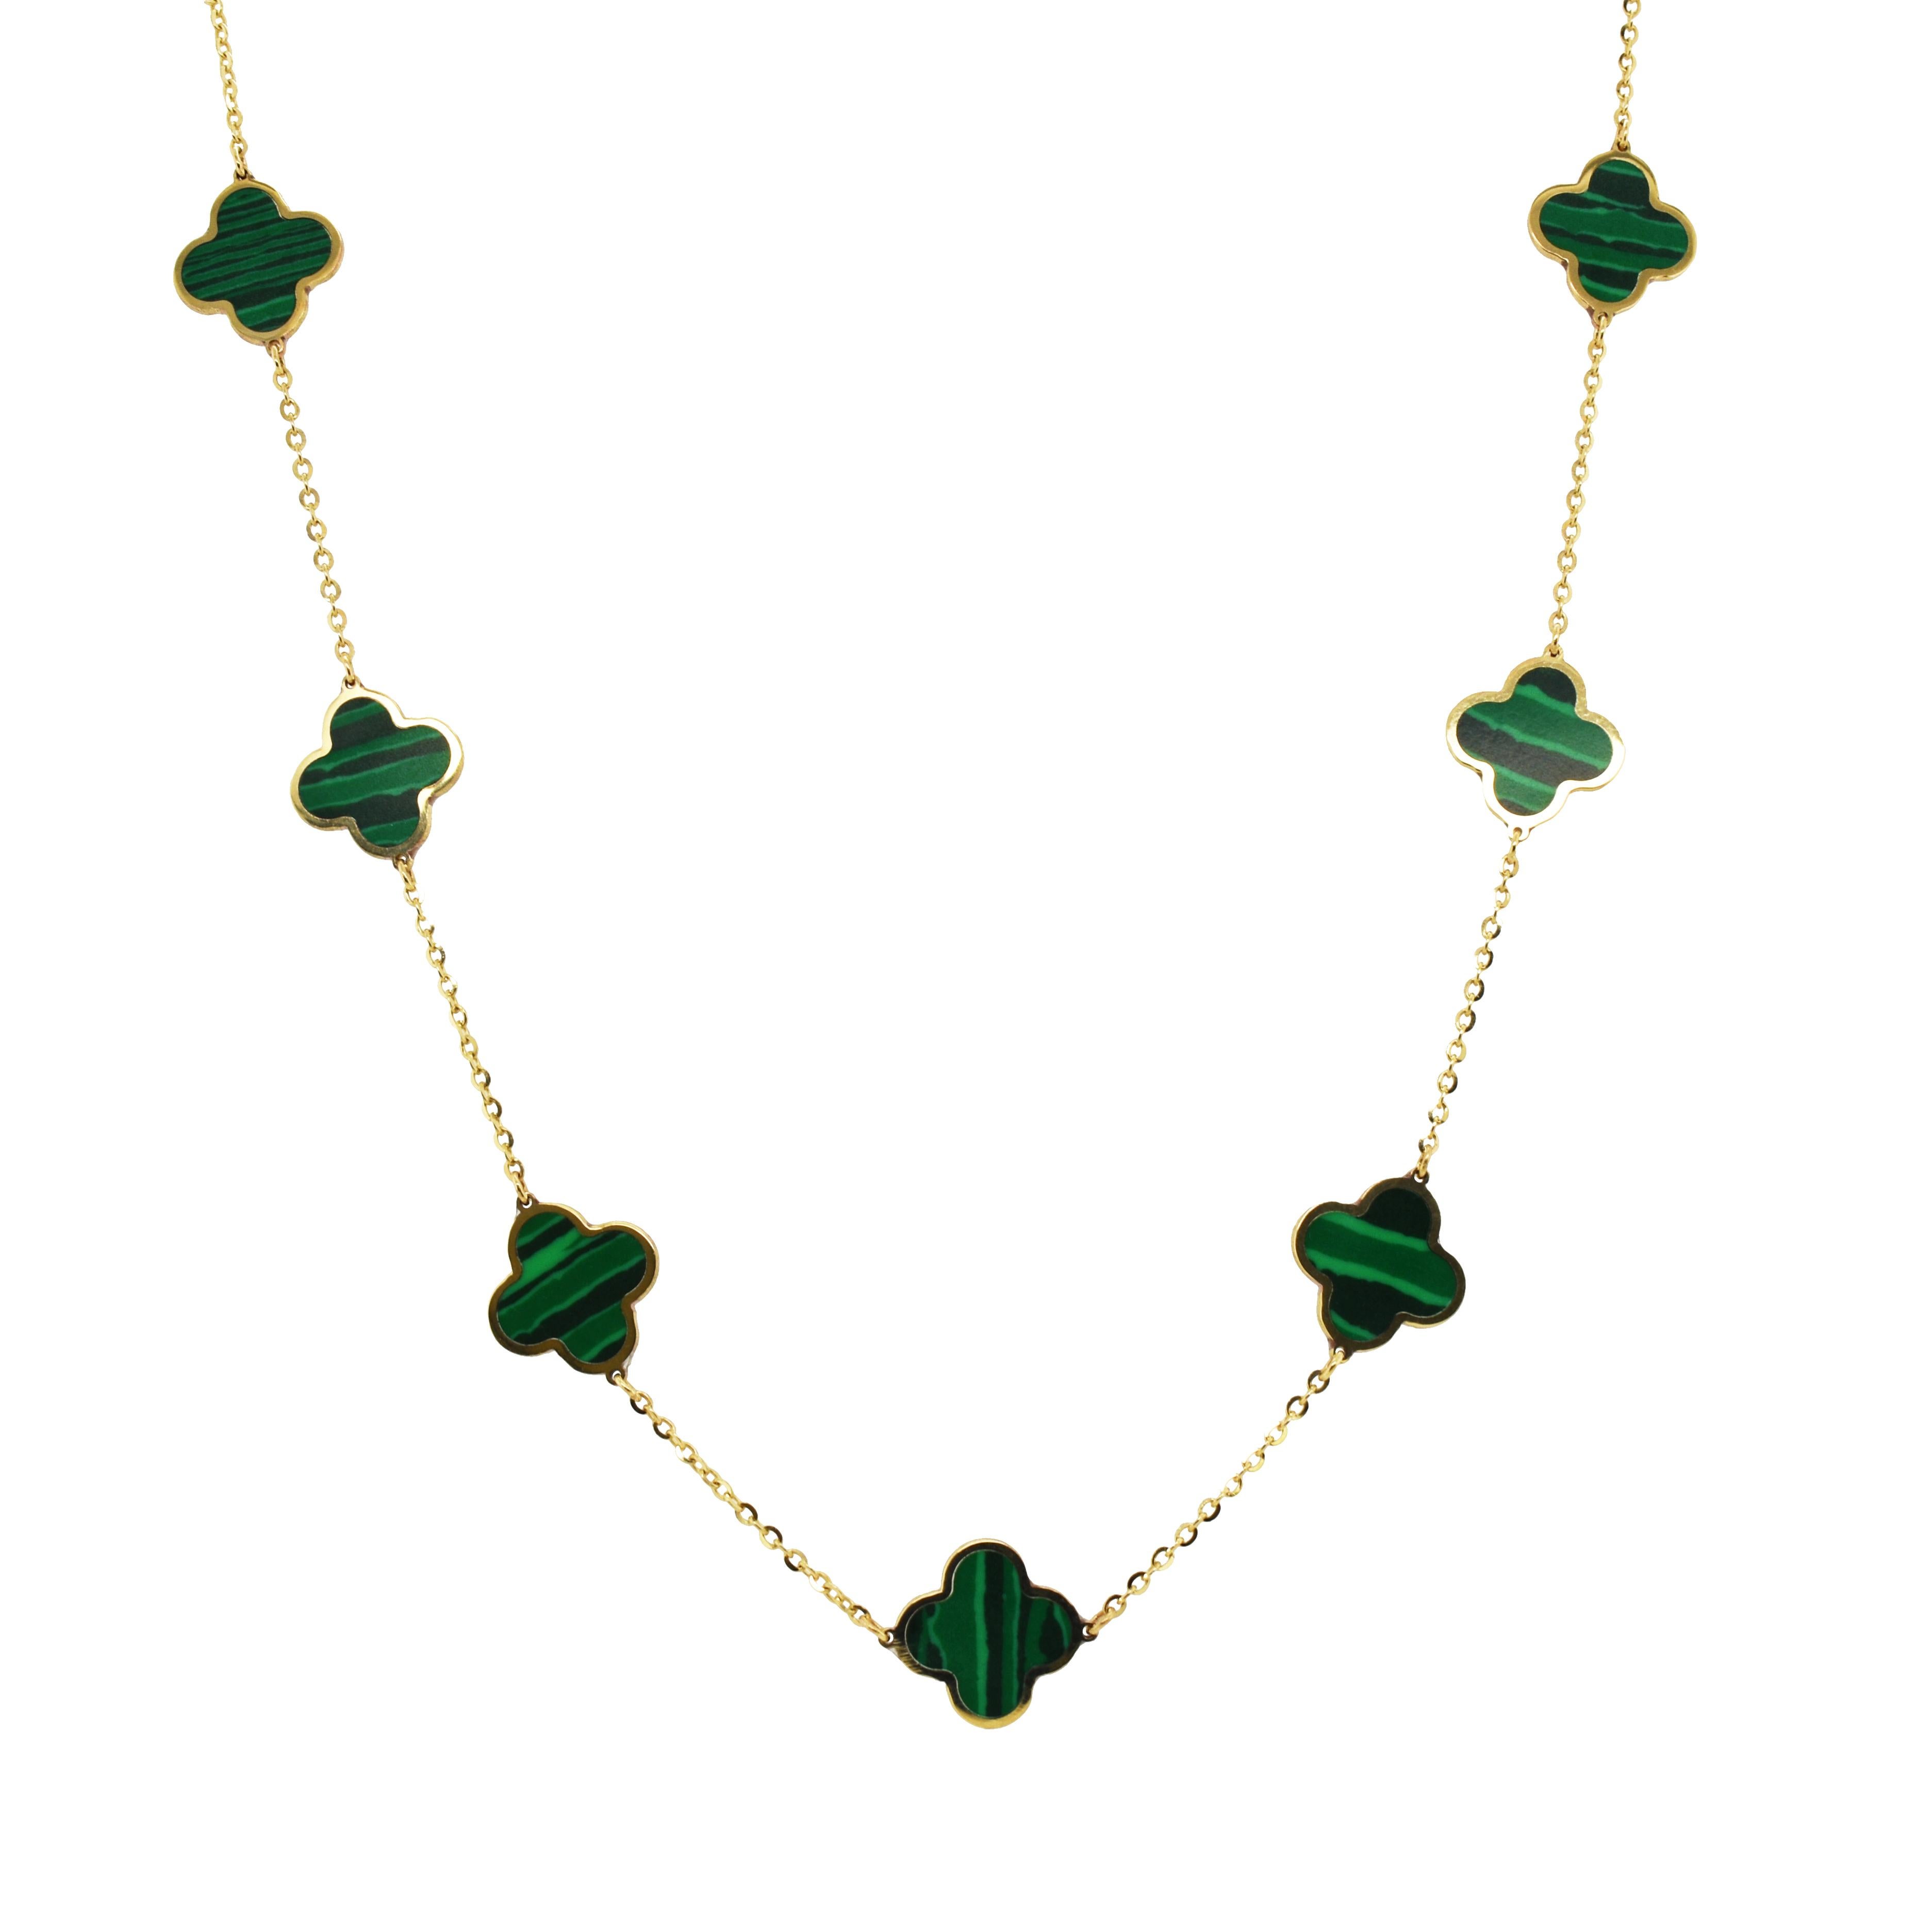 14K GOLD BIG CLOVE MALACHITE NECKLACE

-Necklace Length: 16-18 inches
-Made in Italy

This piece is perfect for everyday wear and makes the perfect Gift! 

We certify that this is an authentic piece of Fine jewelry. Every piece is crafted with the